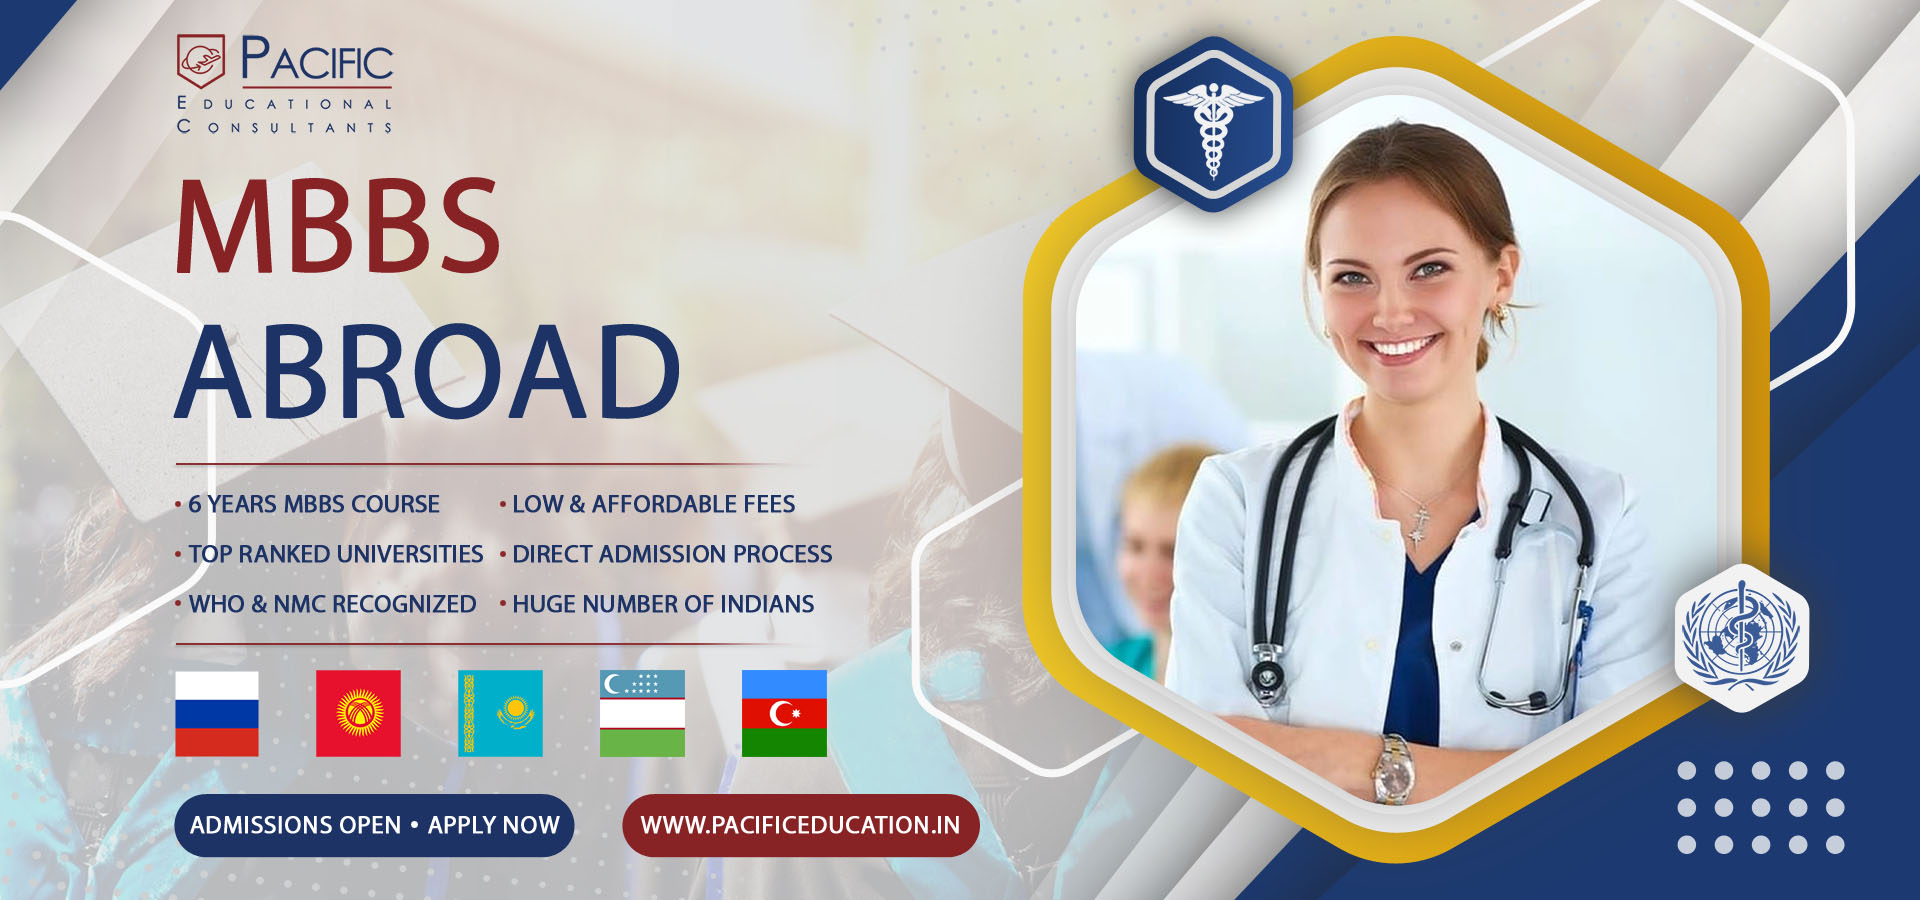 Study MBBS Abroad | Pacific Educational Consultants